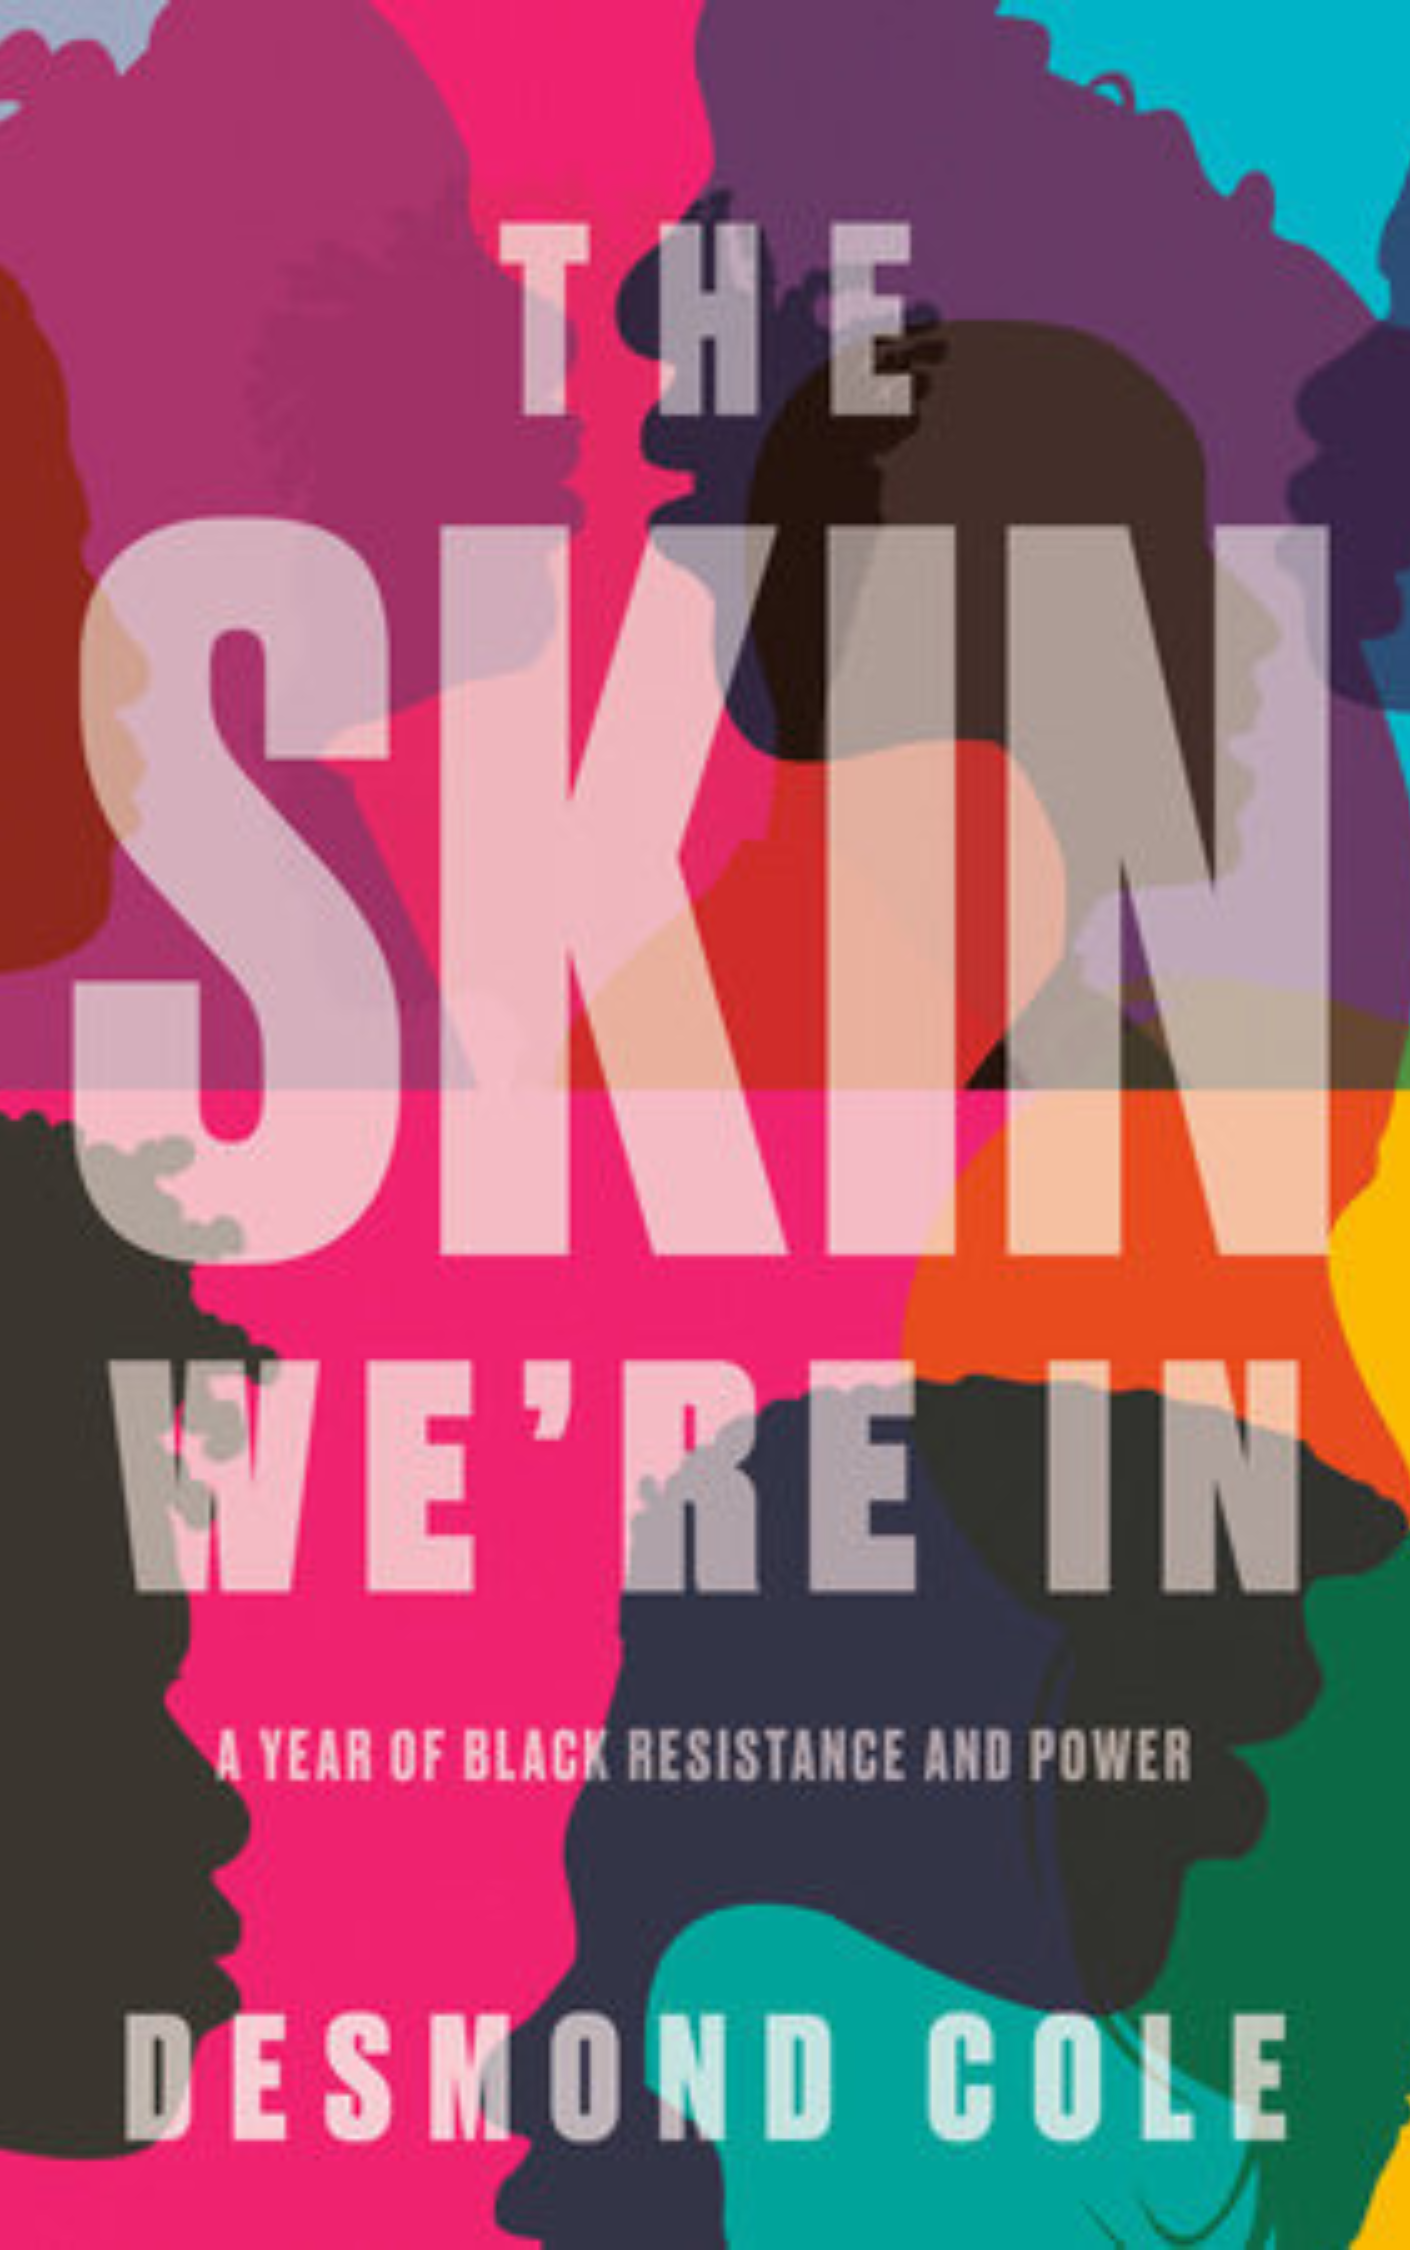 The Skin We're In by Desmond Cole